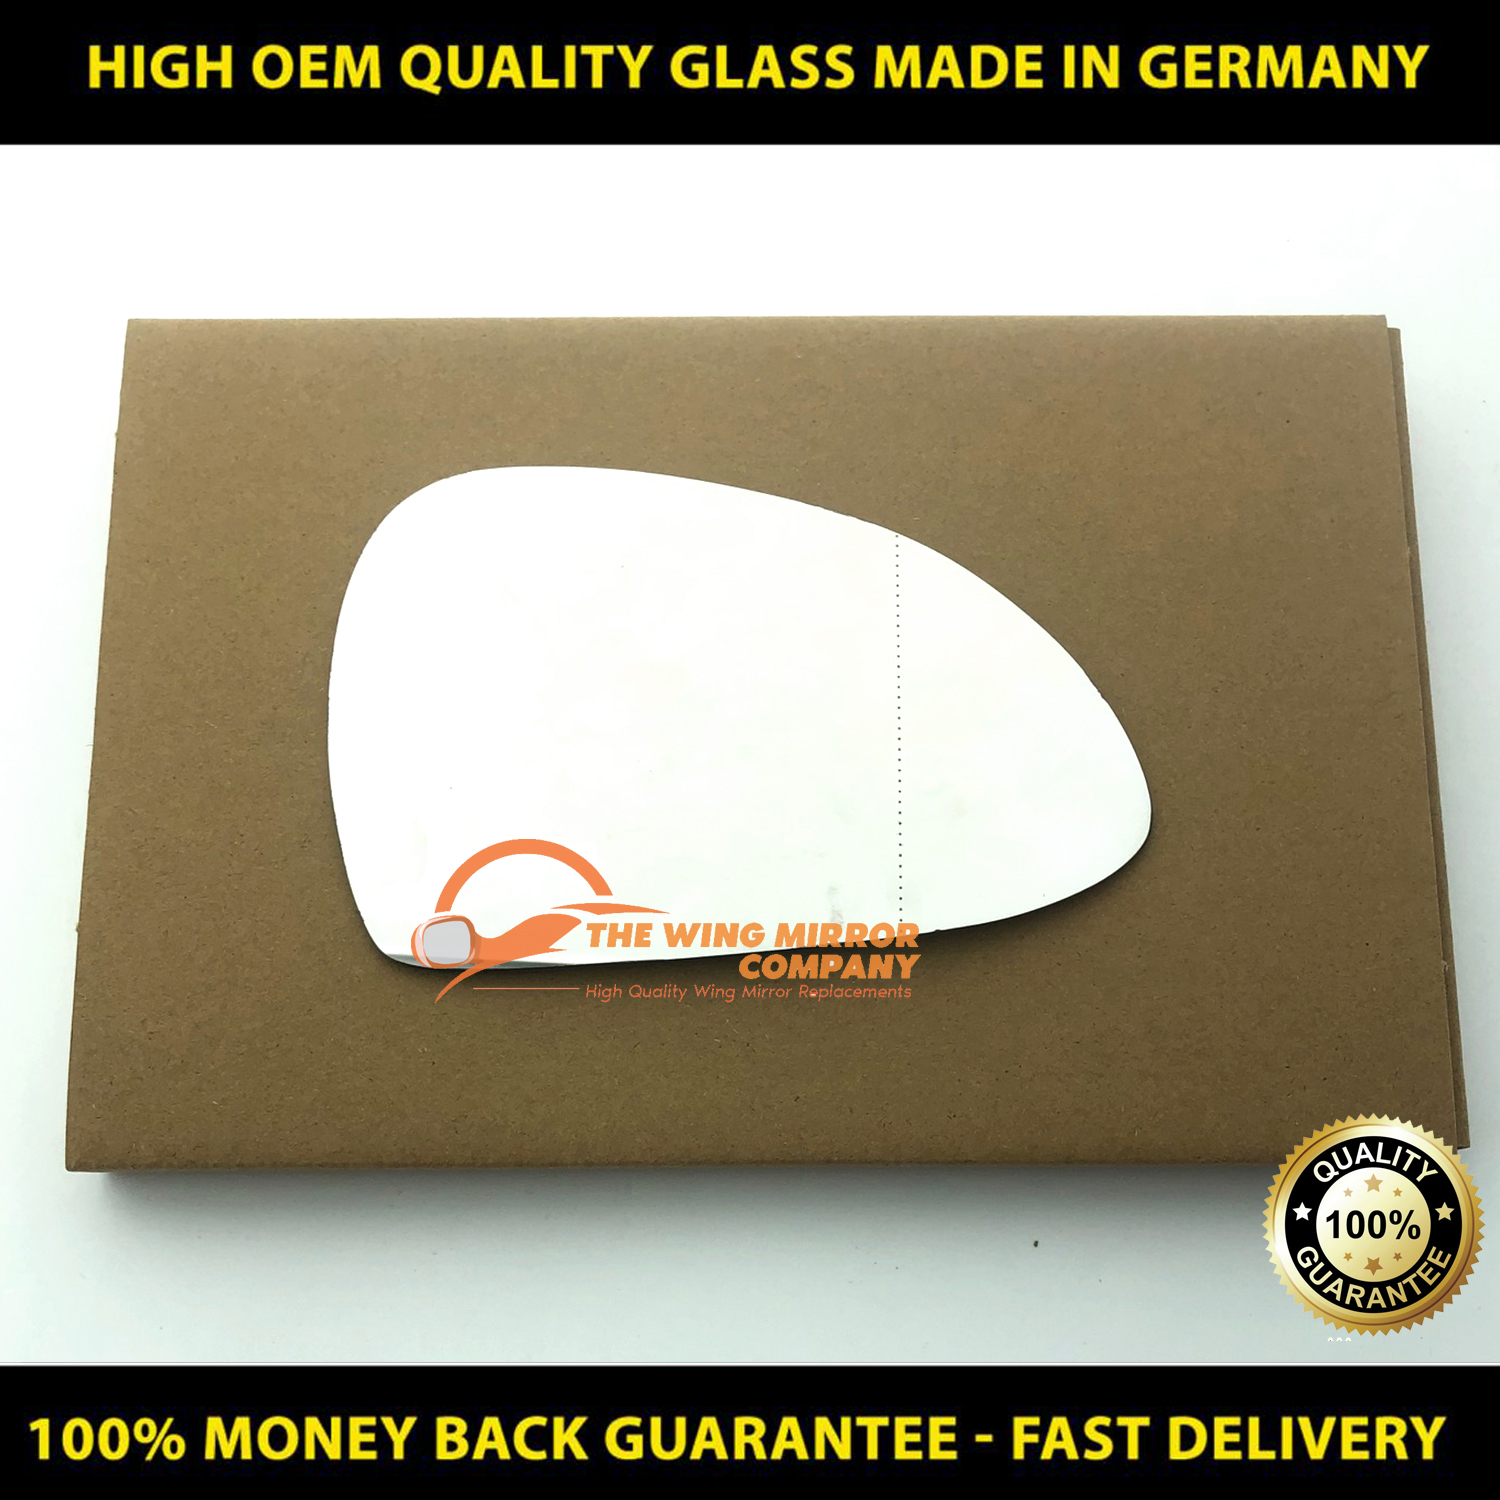 Low Price and High Quality Guarantee on Volkswagen Golf Driver